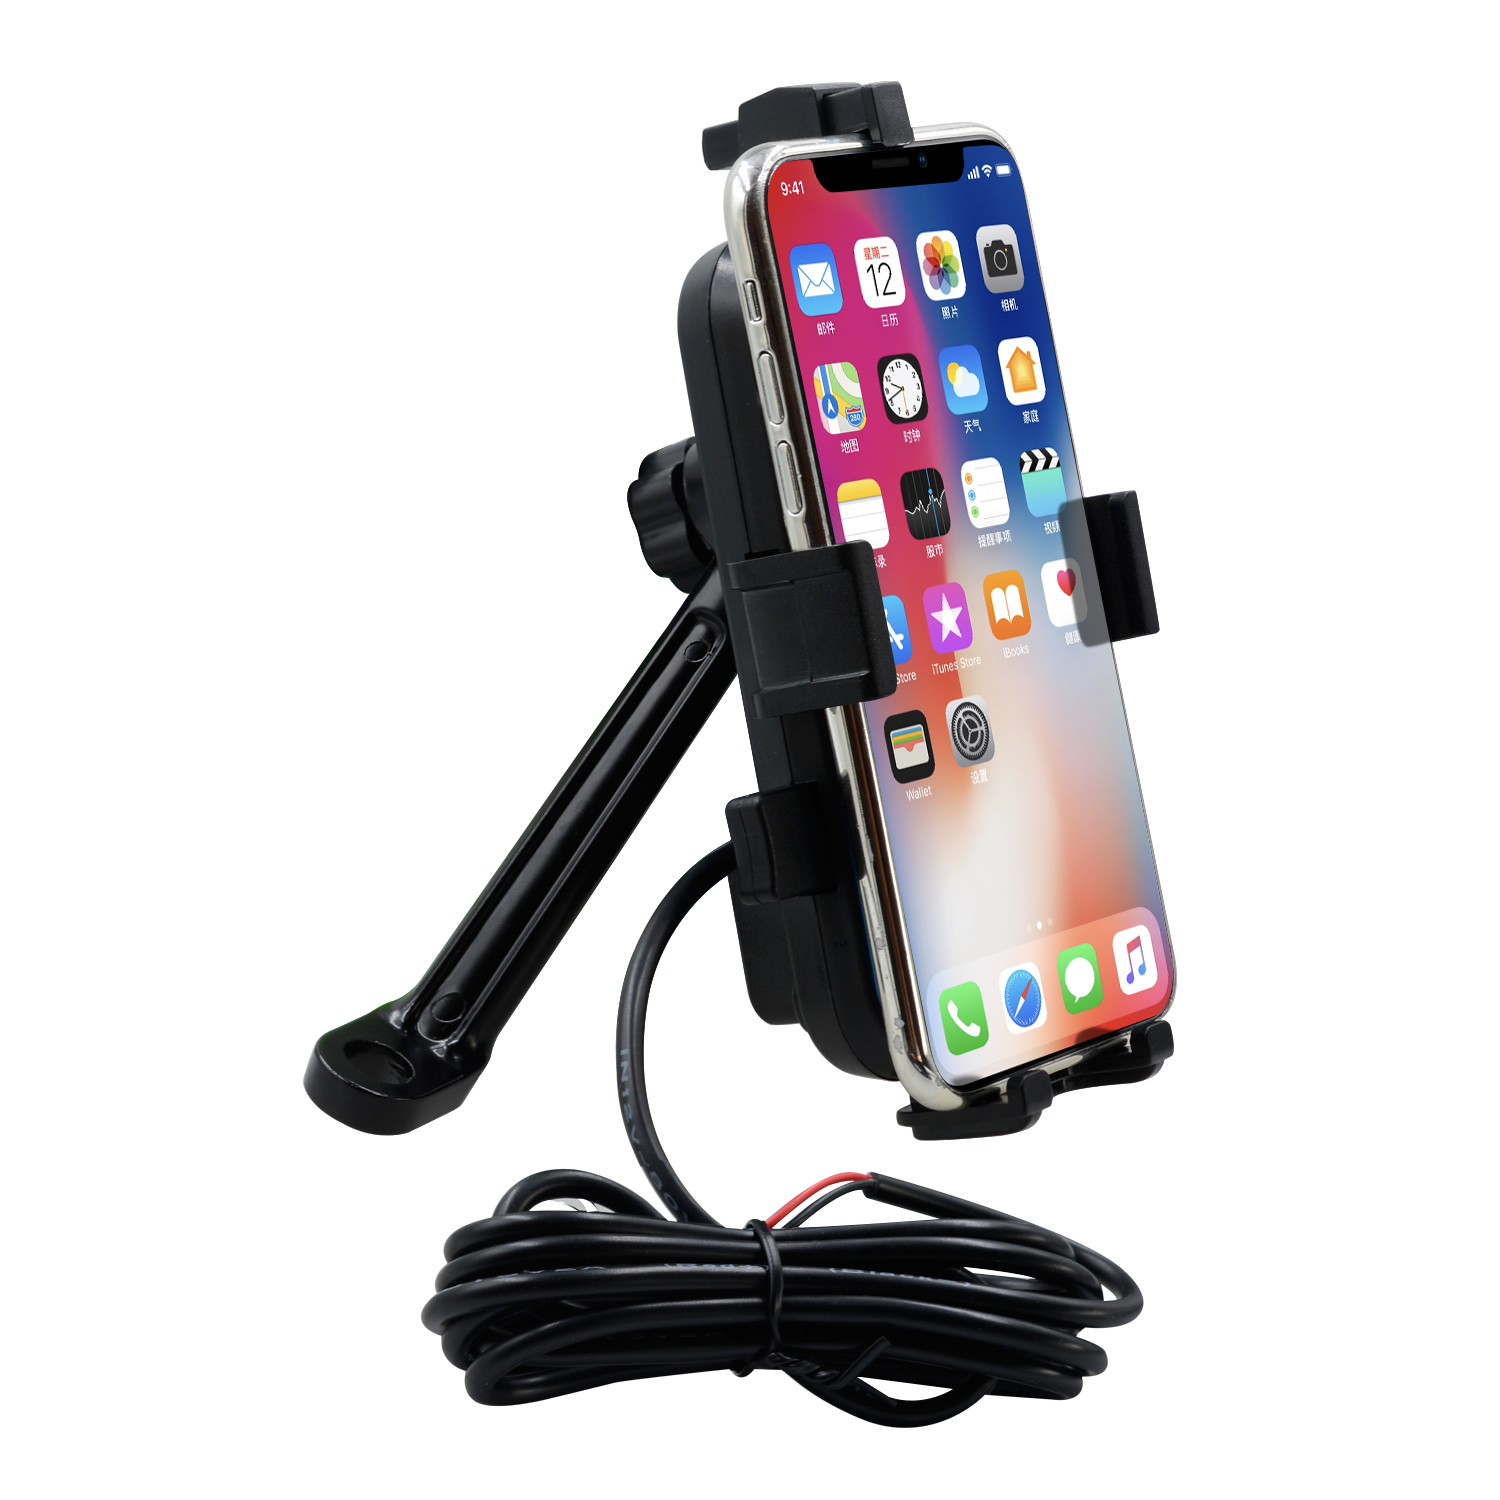 

Dual USB Charger CS-344B2 Phone Holder 360° Rotation Stand For Motocycle Bike Rearview Holder For 4''-6.5'' Smart Phone